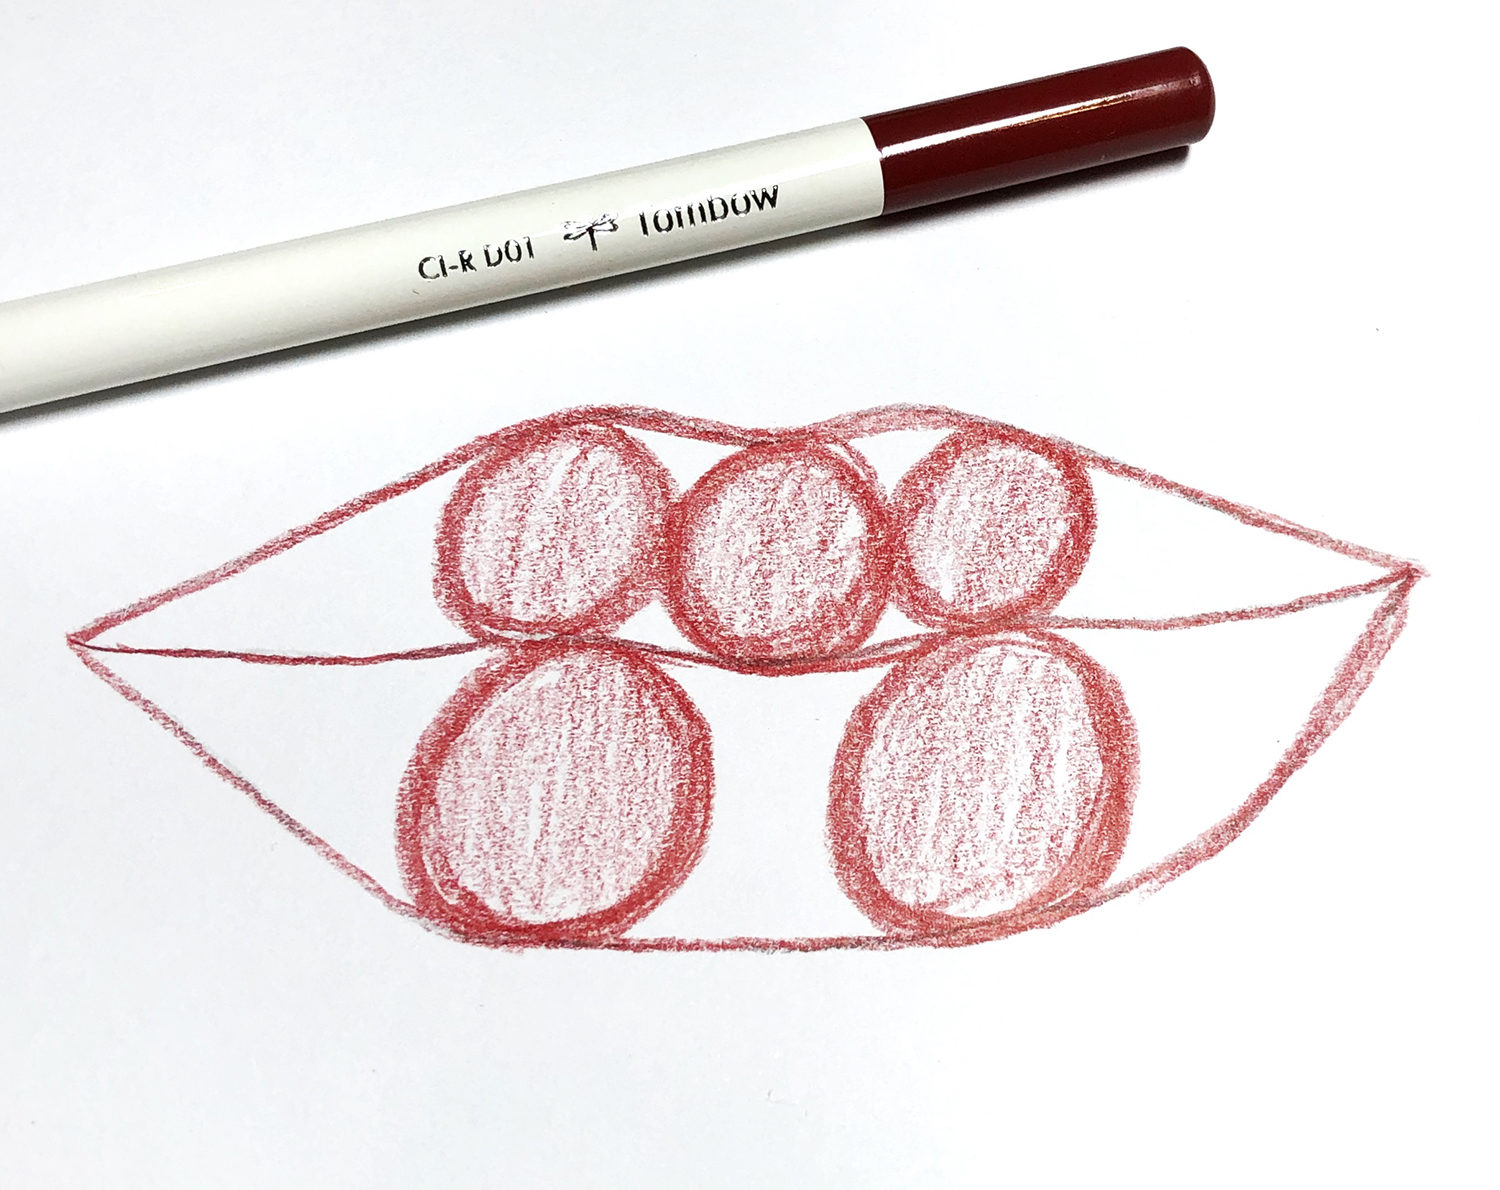 How To Draw Lips Using Irojiten Colored Pencils Tombow Usa Blog Here's what happened when 12 random people took turns drawing and describing, starting with the prompt fruit with lips. tombow usa blog